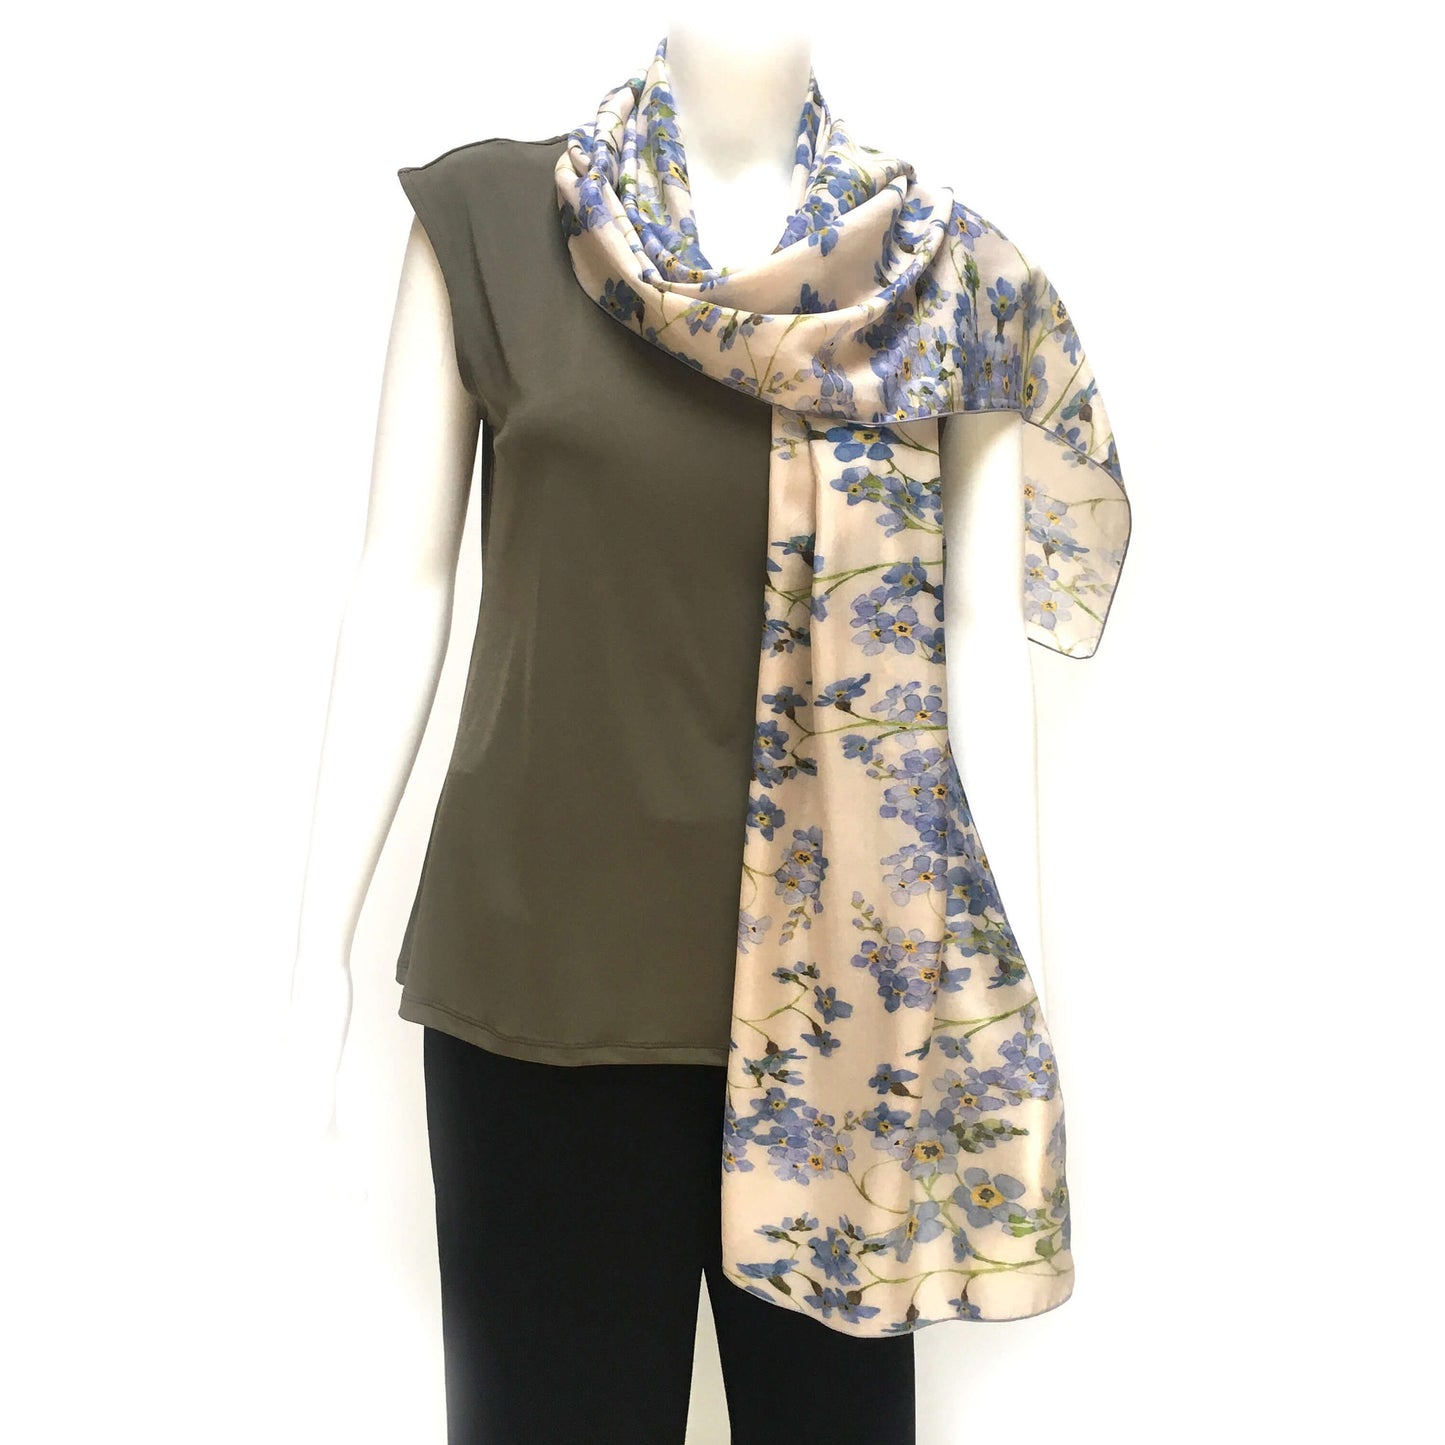 Forget-Me-Not Watercolor Pure Silk Scarf  72x16 ,Woman Scarf,  Lightweight Scarf,ladies scarf,Floral Scarf